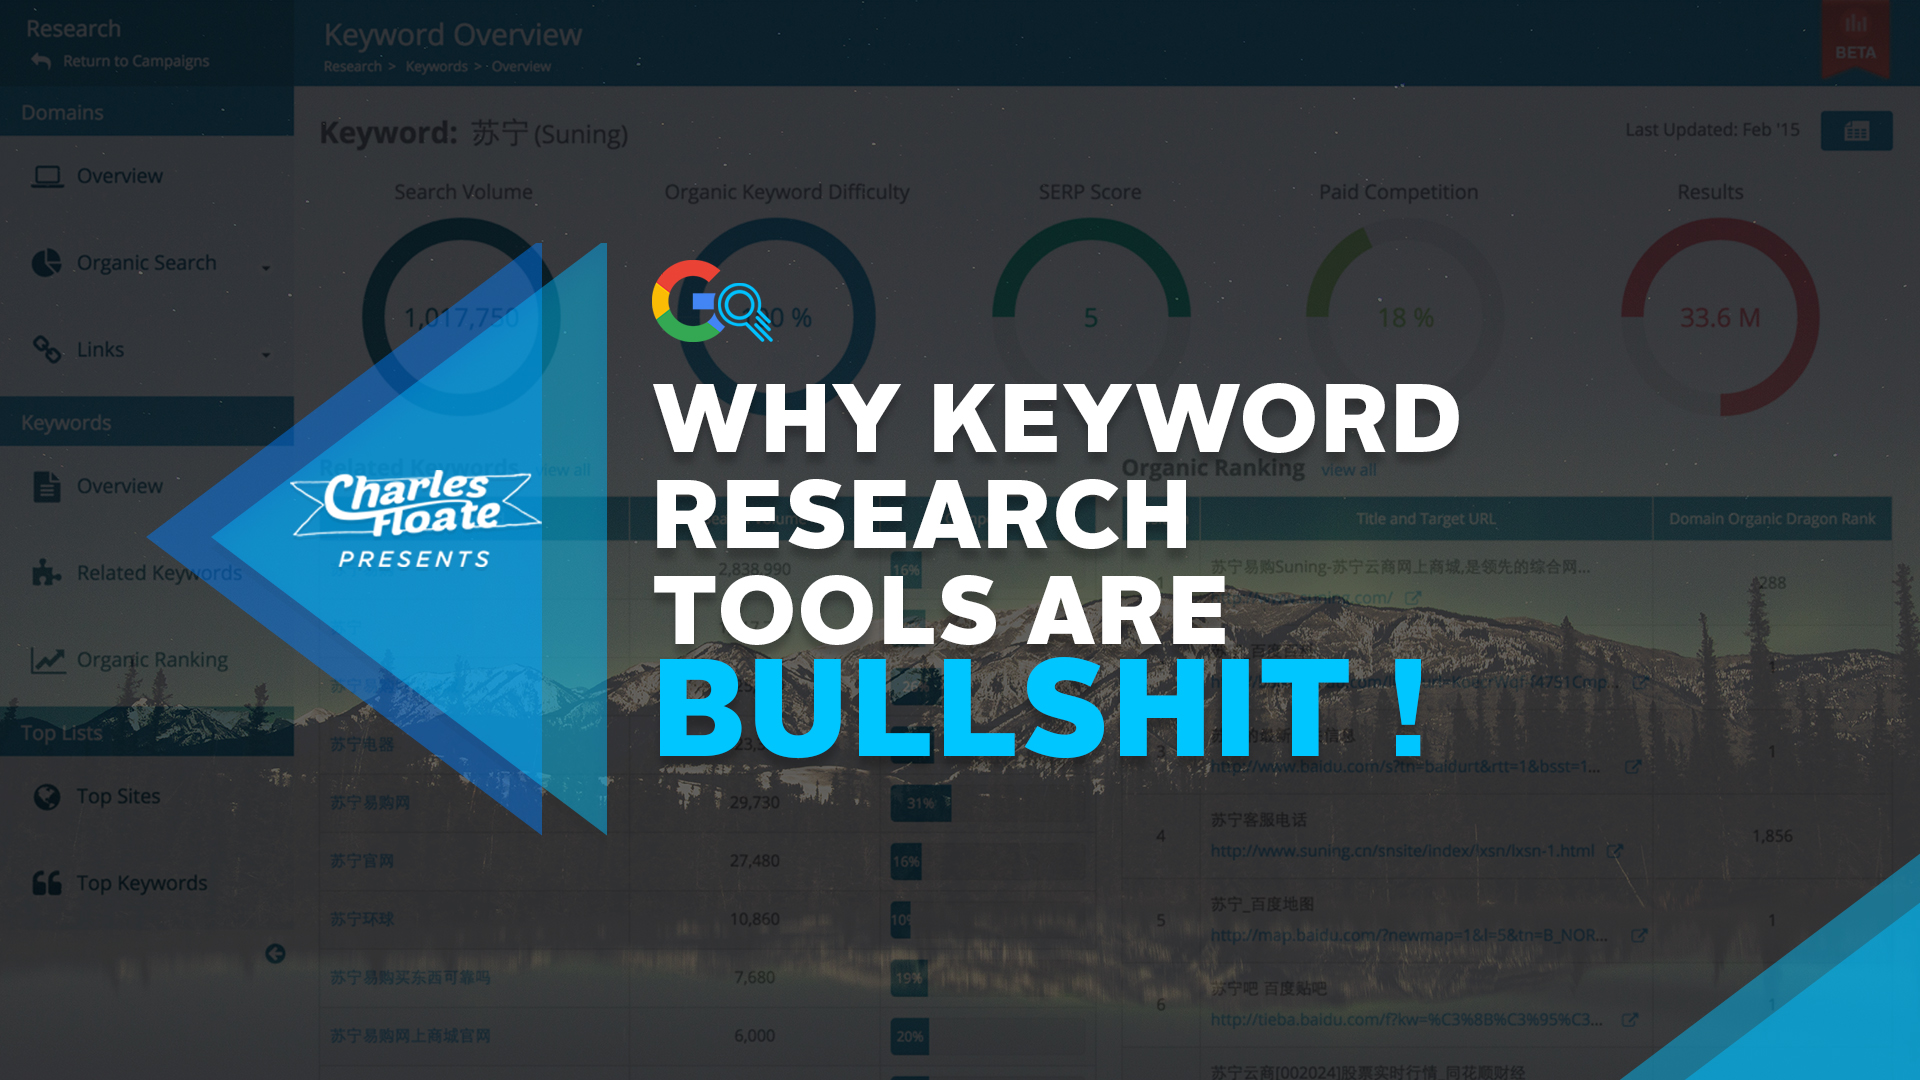 Why Keyword Research Tools Are Bullshit